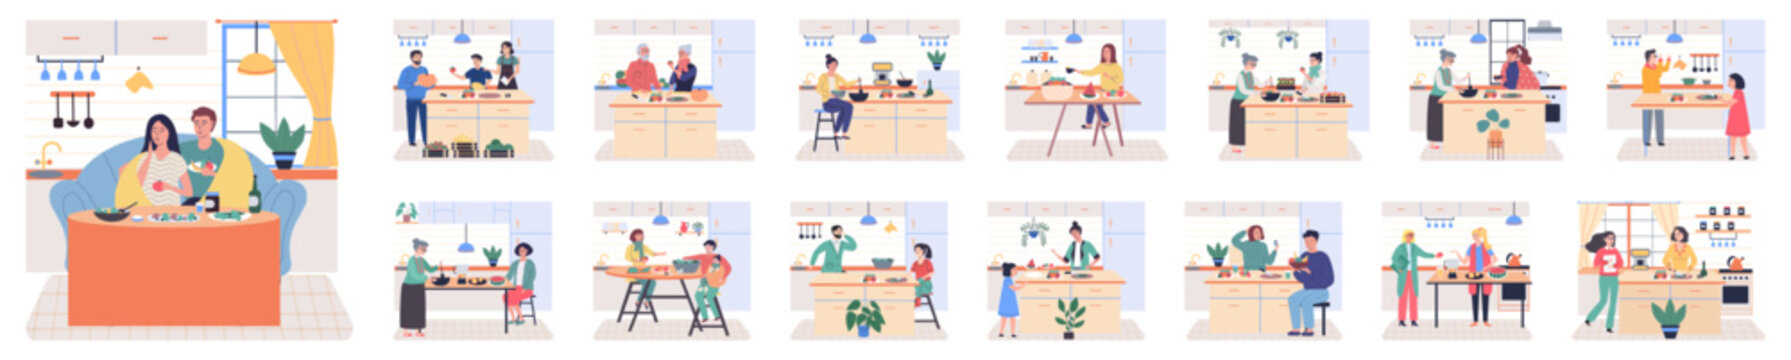 People cooking vegetarian food. Vector illustration. People cooking at home, happy couple at kitchen. Home cooking room with wooden dining table. Home kitchen cooking, man and woman together